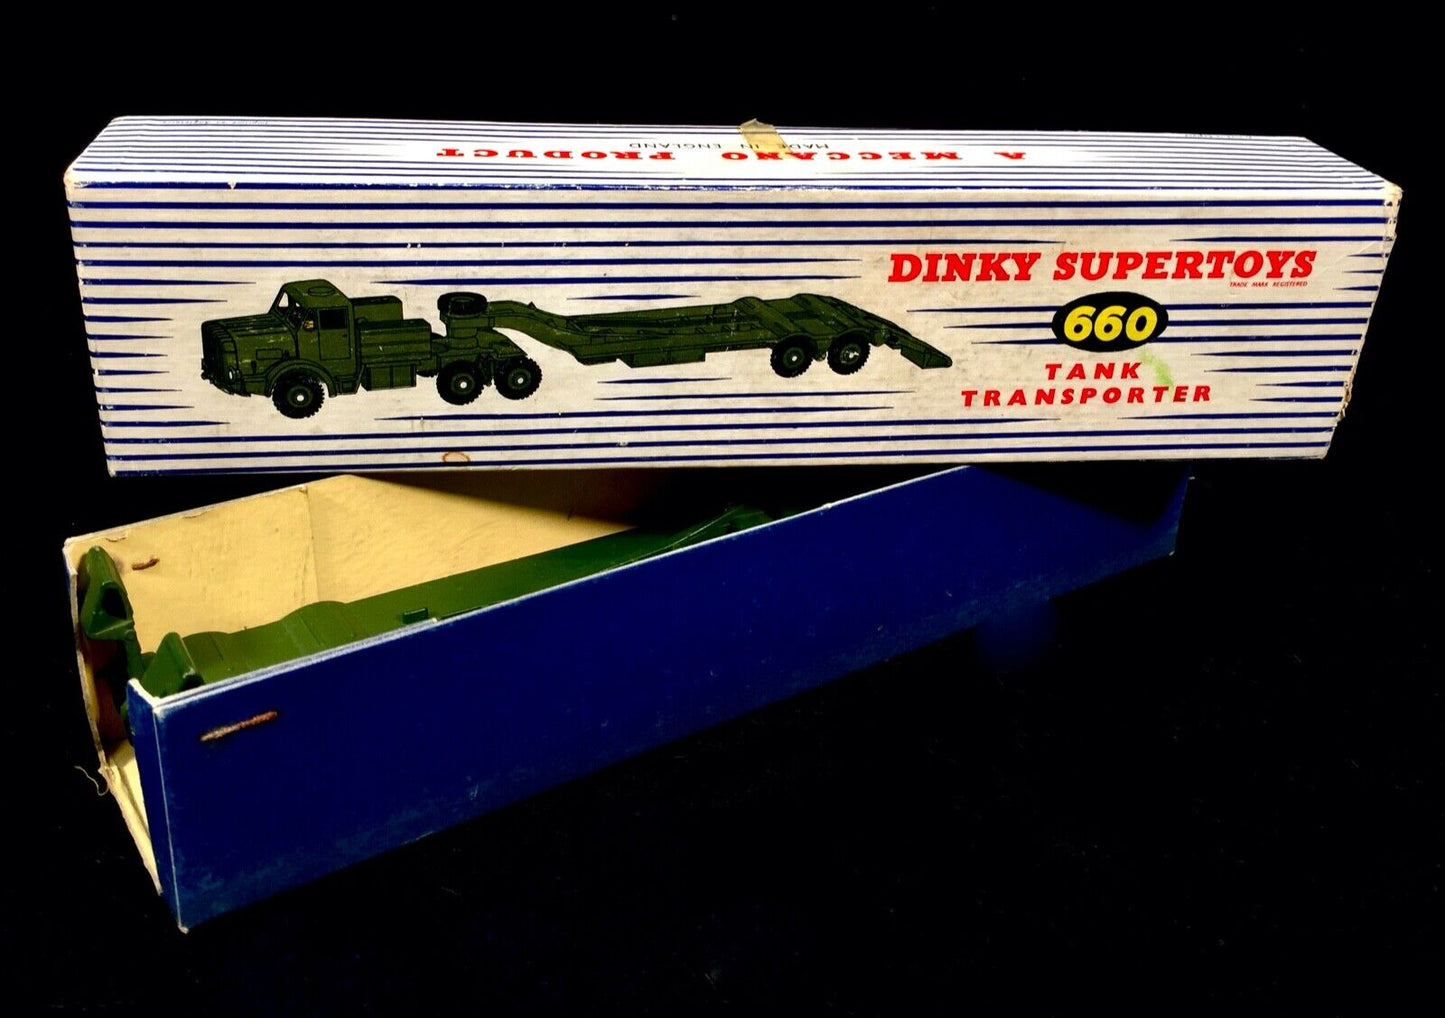 Vintage Dinky Meccano Supertoys 660 Tank Transporter Toy / Boxed / Mighty Antar